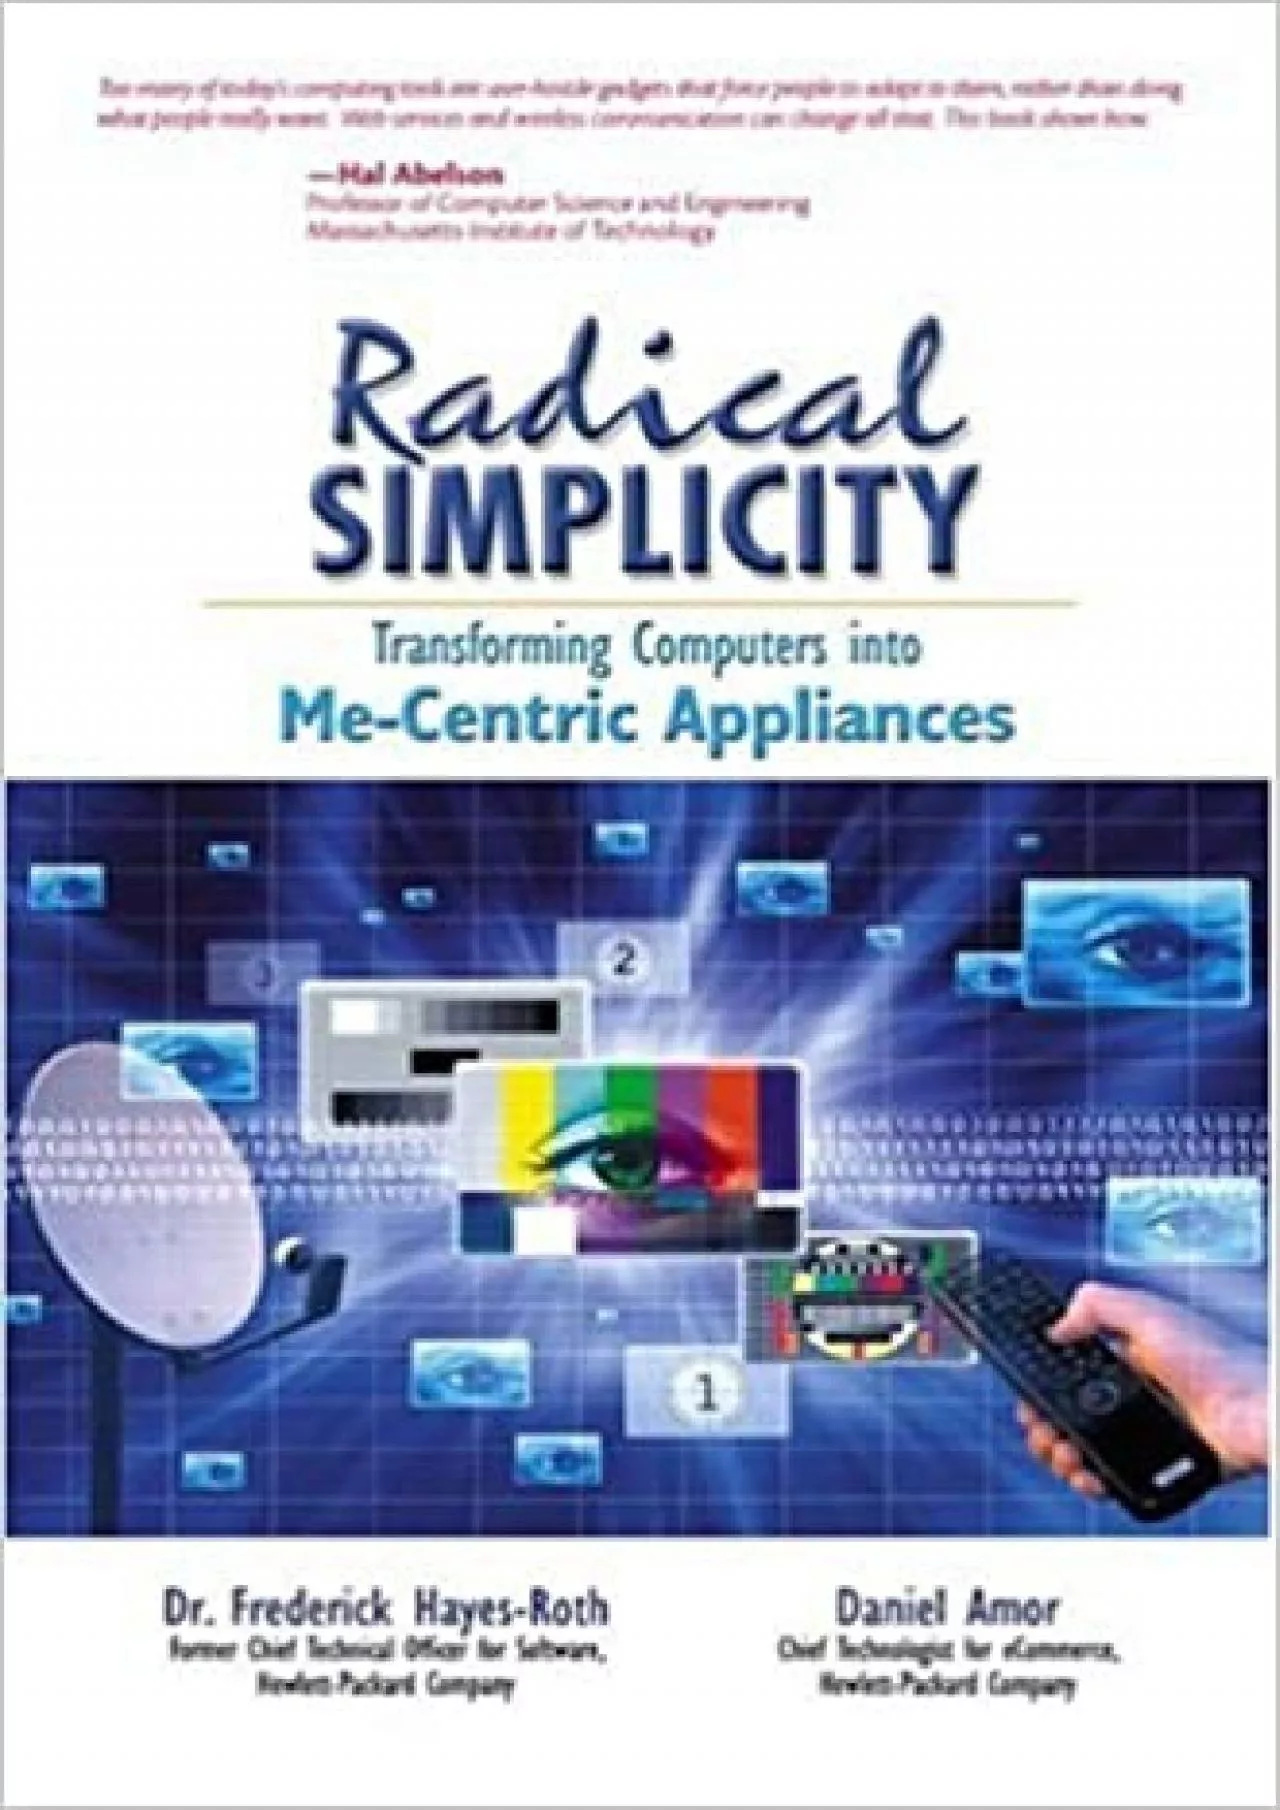 (READ)-Radical Simplicity Transforming Computers into Me-Centric Appliances (Hewlett-Packard